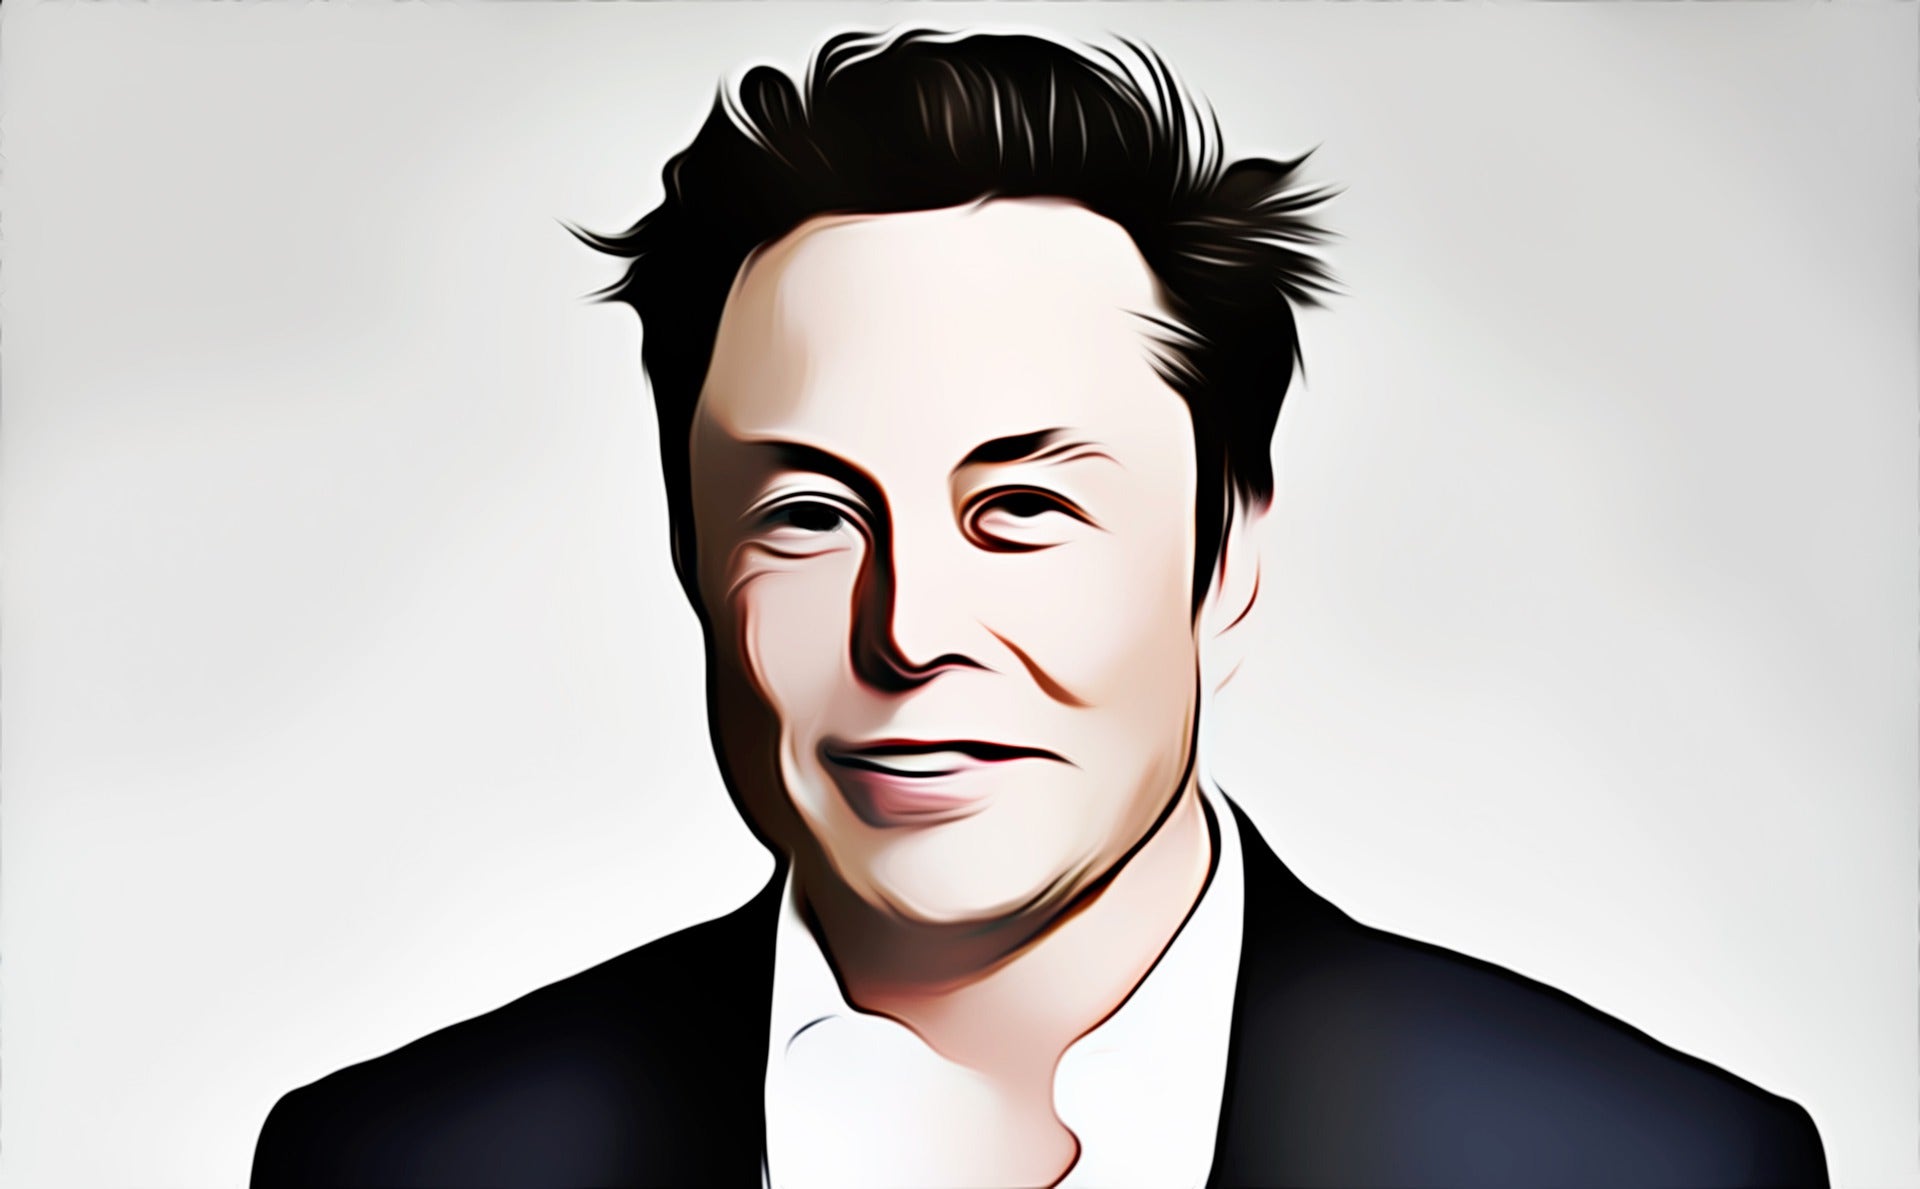 50 Facts And Figures About Elon Musk On His 50th Birthday